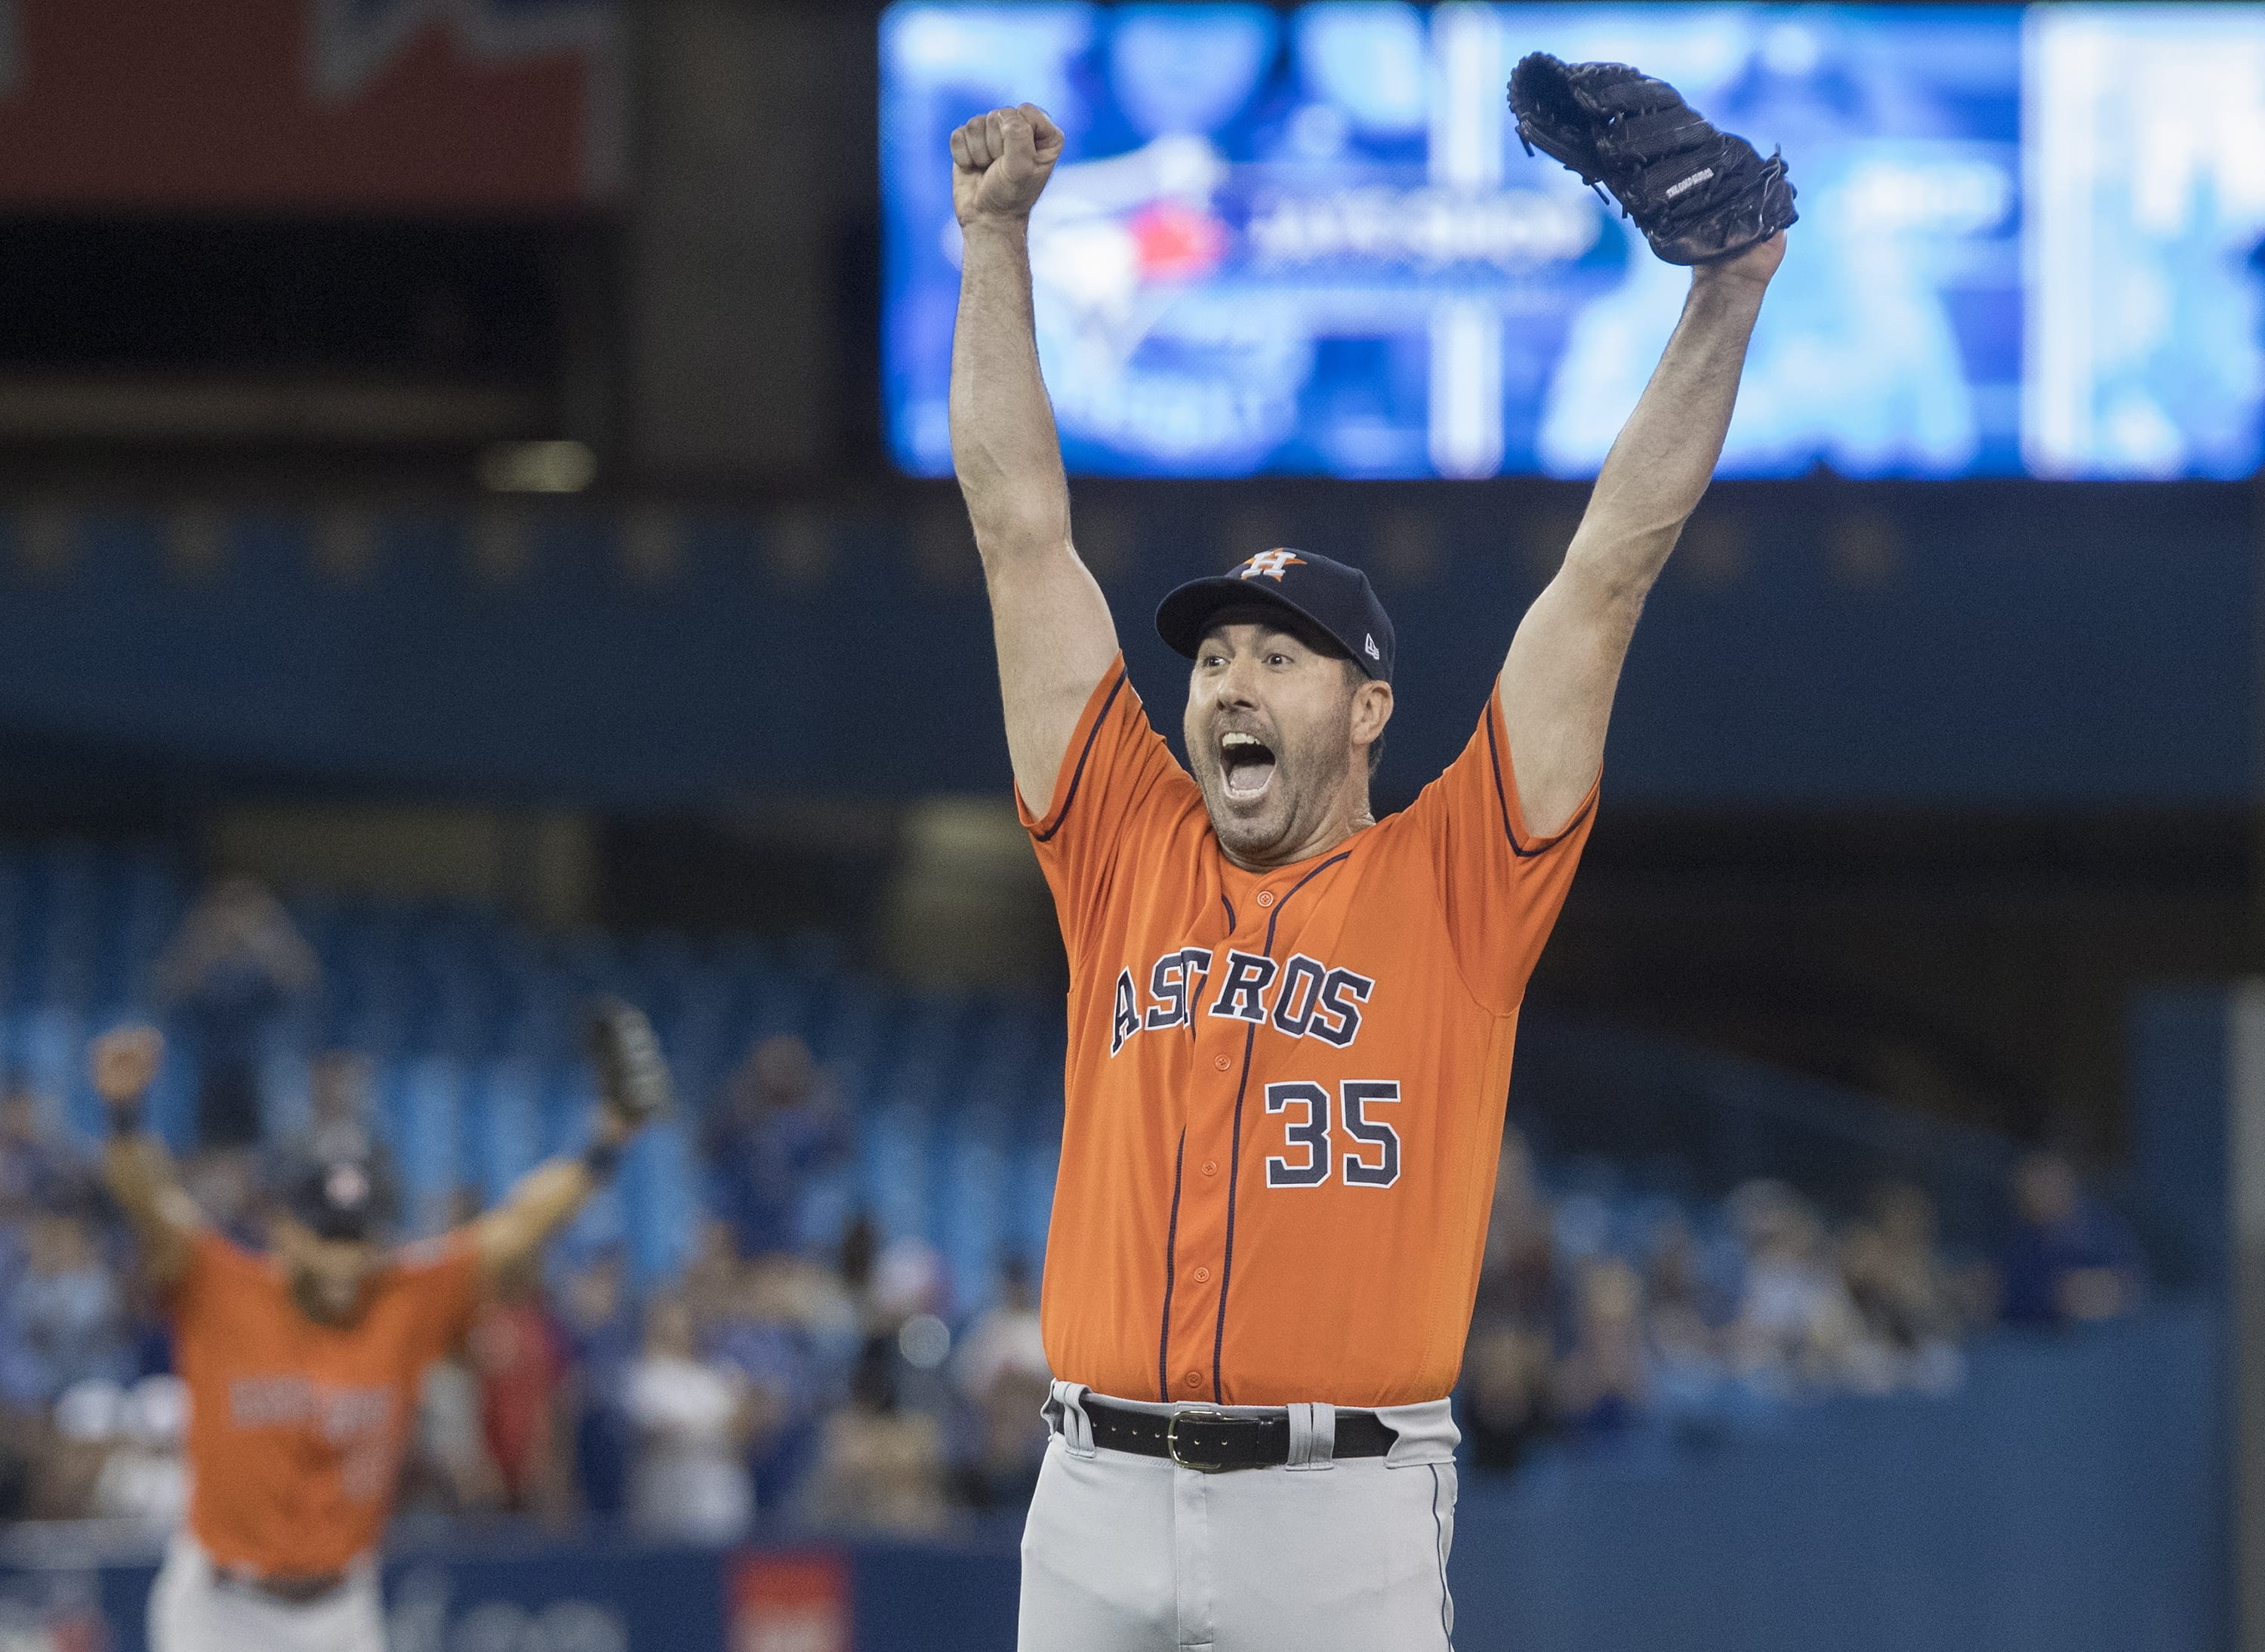 Houston Astros starter Justin Verlander reacts after pitching a no-hitter against the Toronto Blue Jays in a baseball game in Toronto, Sunday, Sept. 1, 2019.